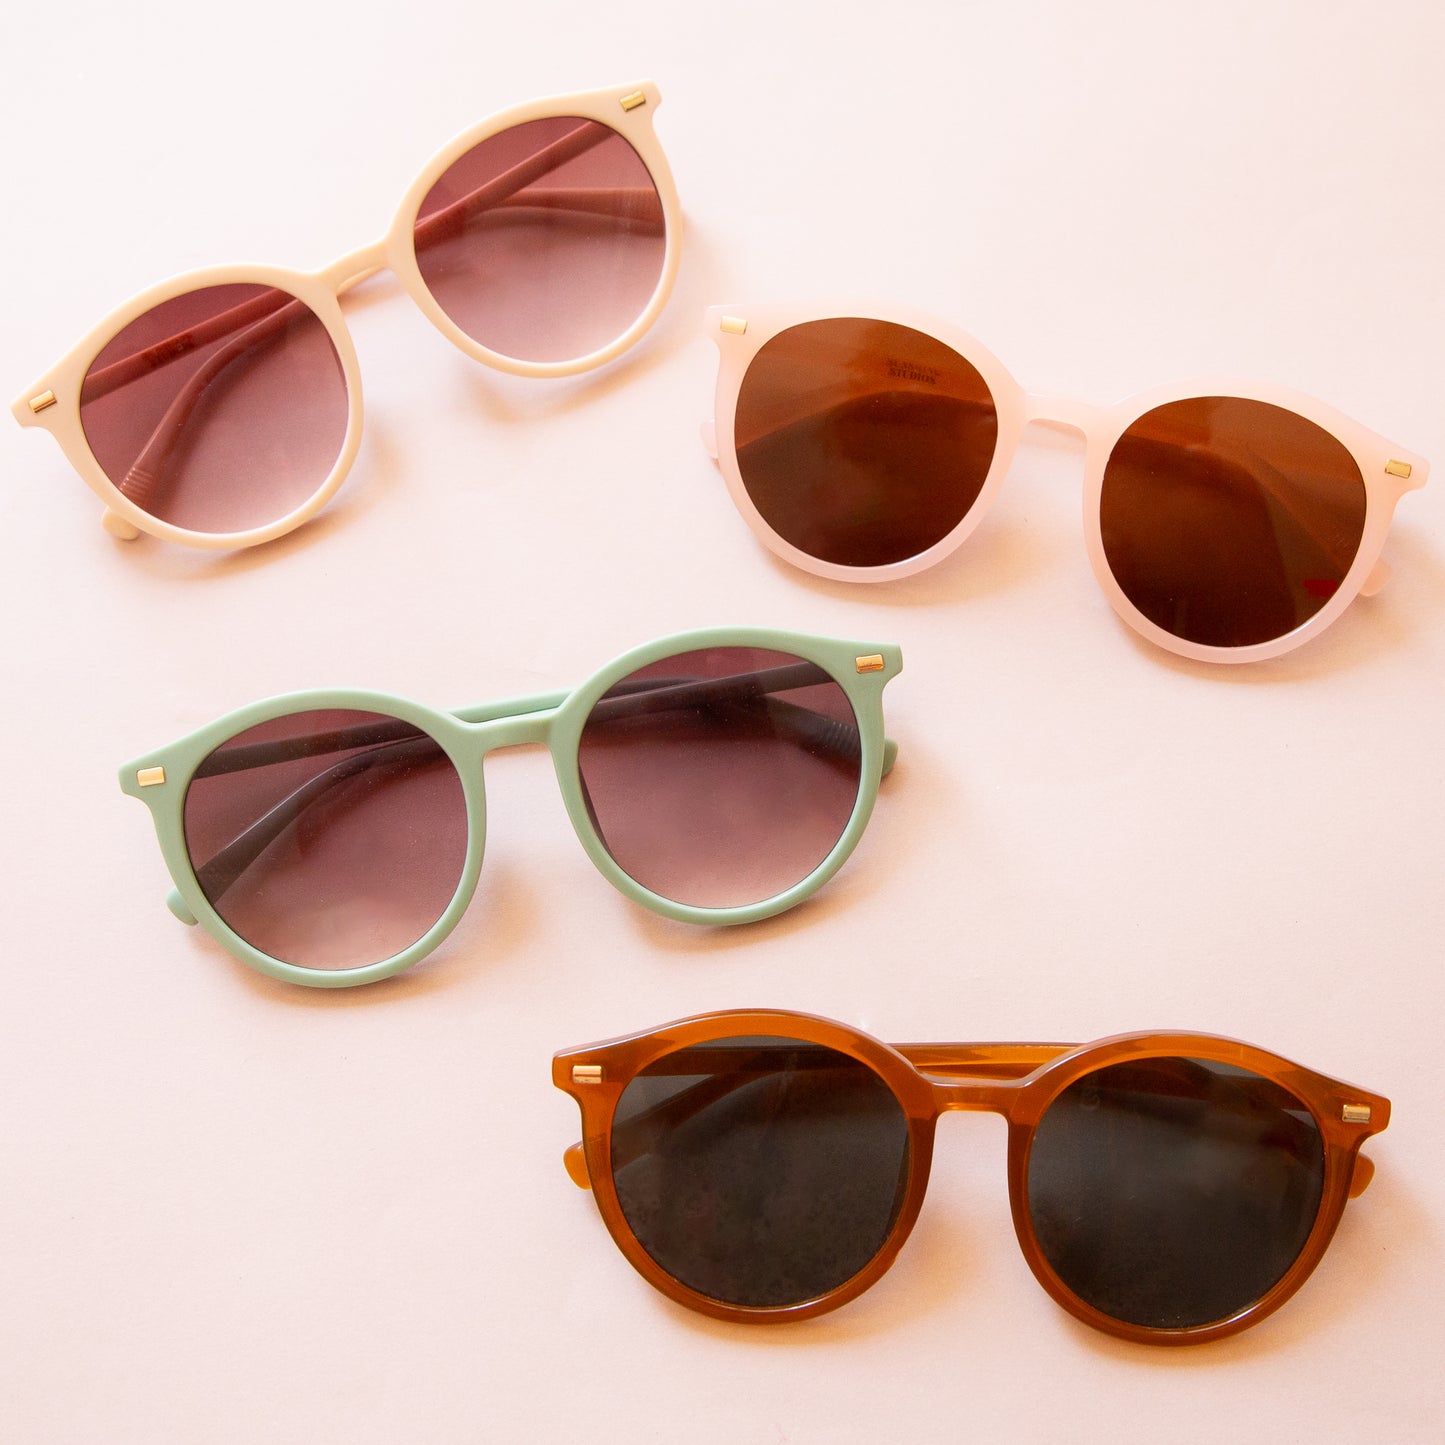 On a peach background is the three Sam sunglasses in the four color ways.